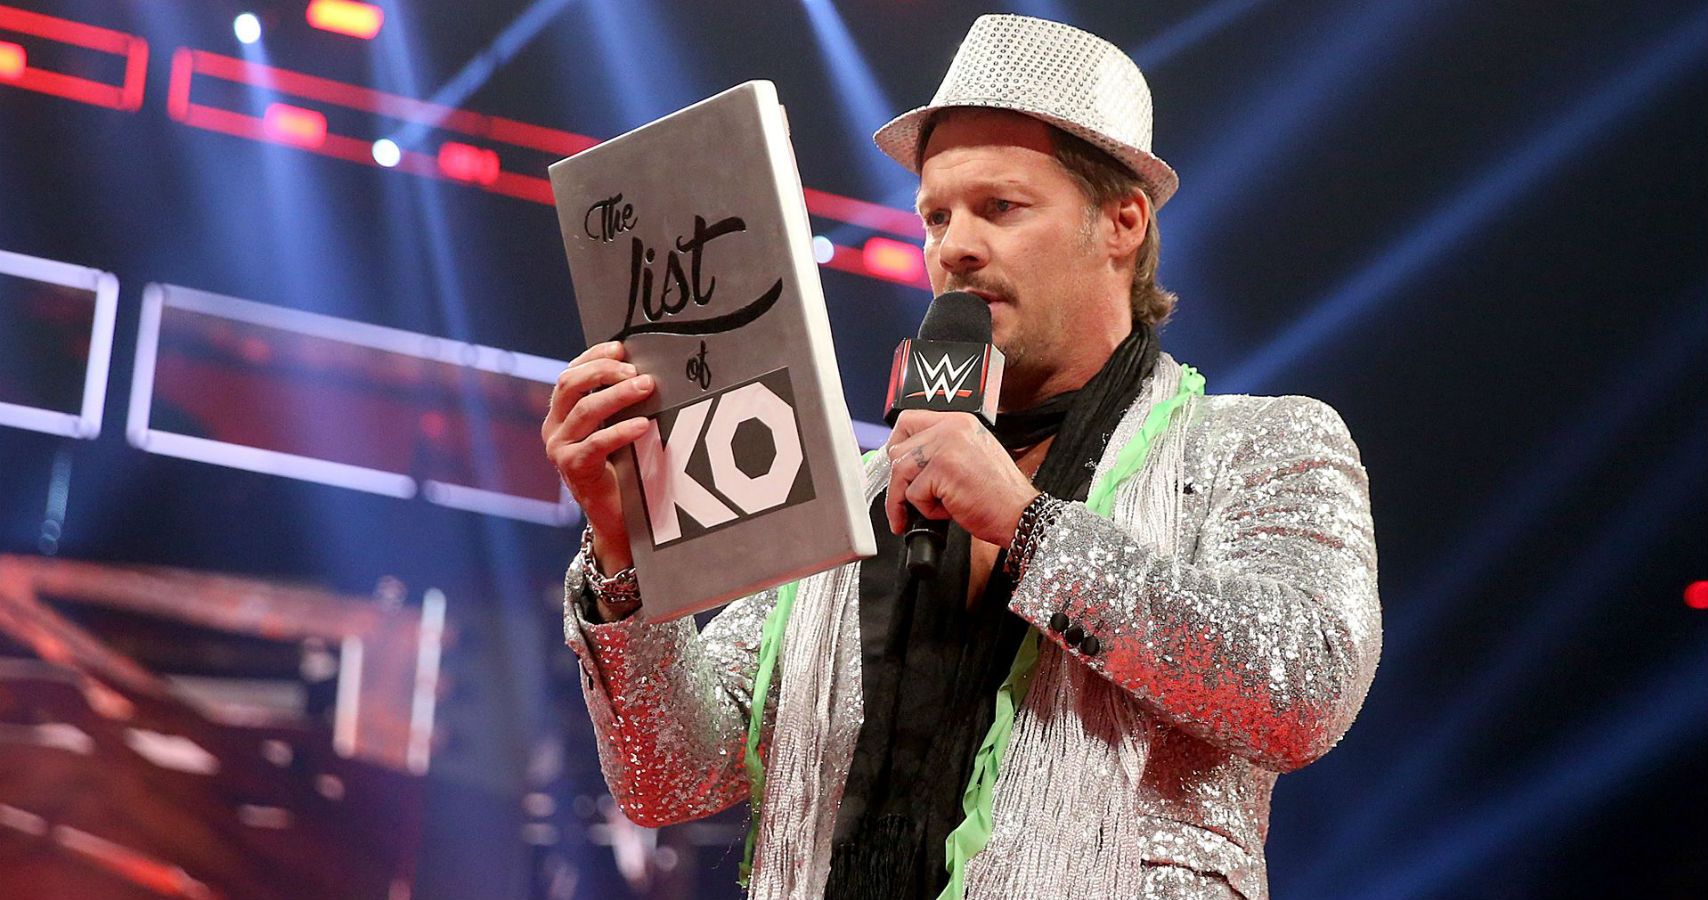 Chris Jericho & Kevin Owens Celebrate The Anniversary Of The Festival Of Friendship